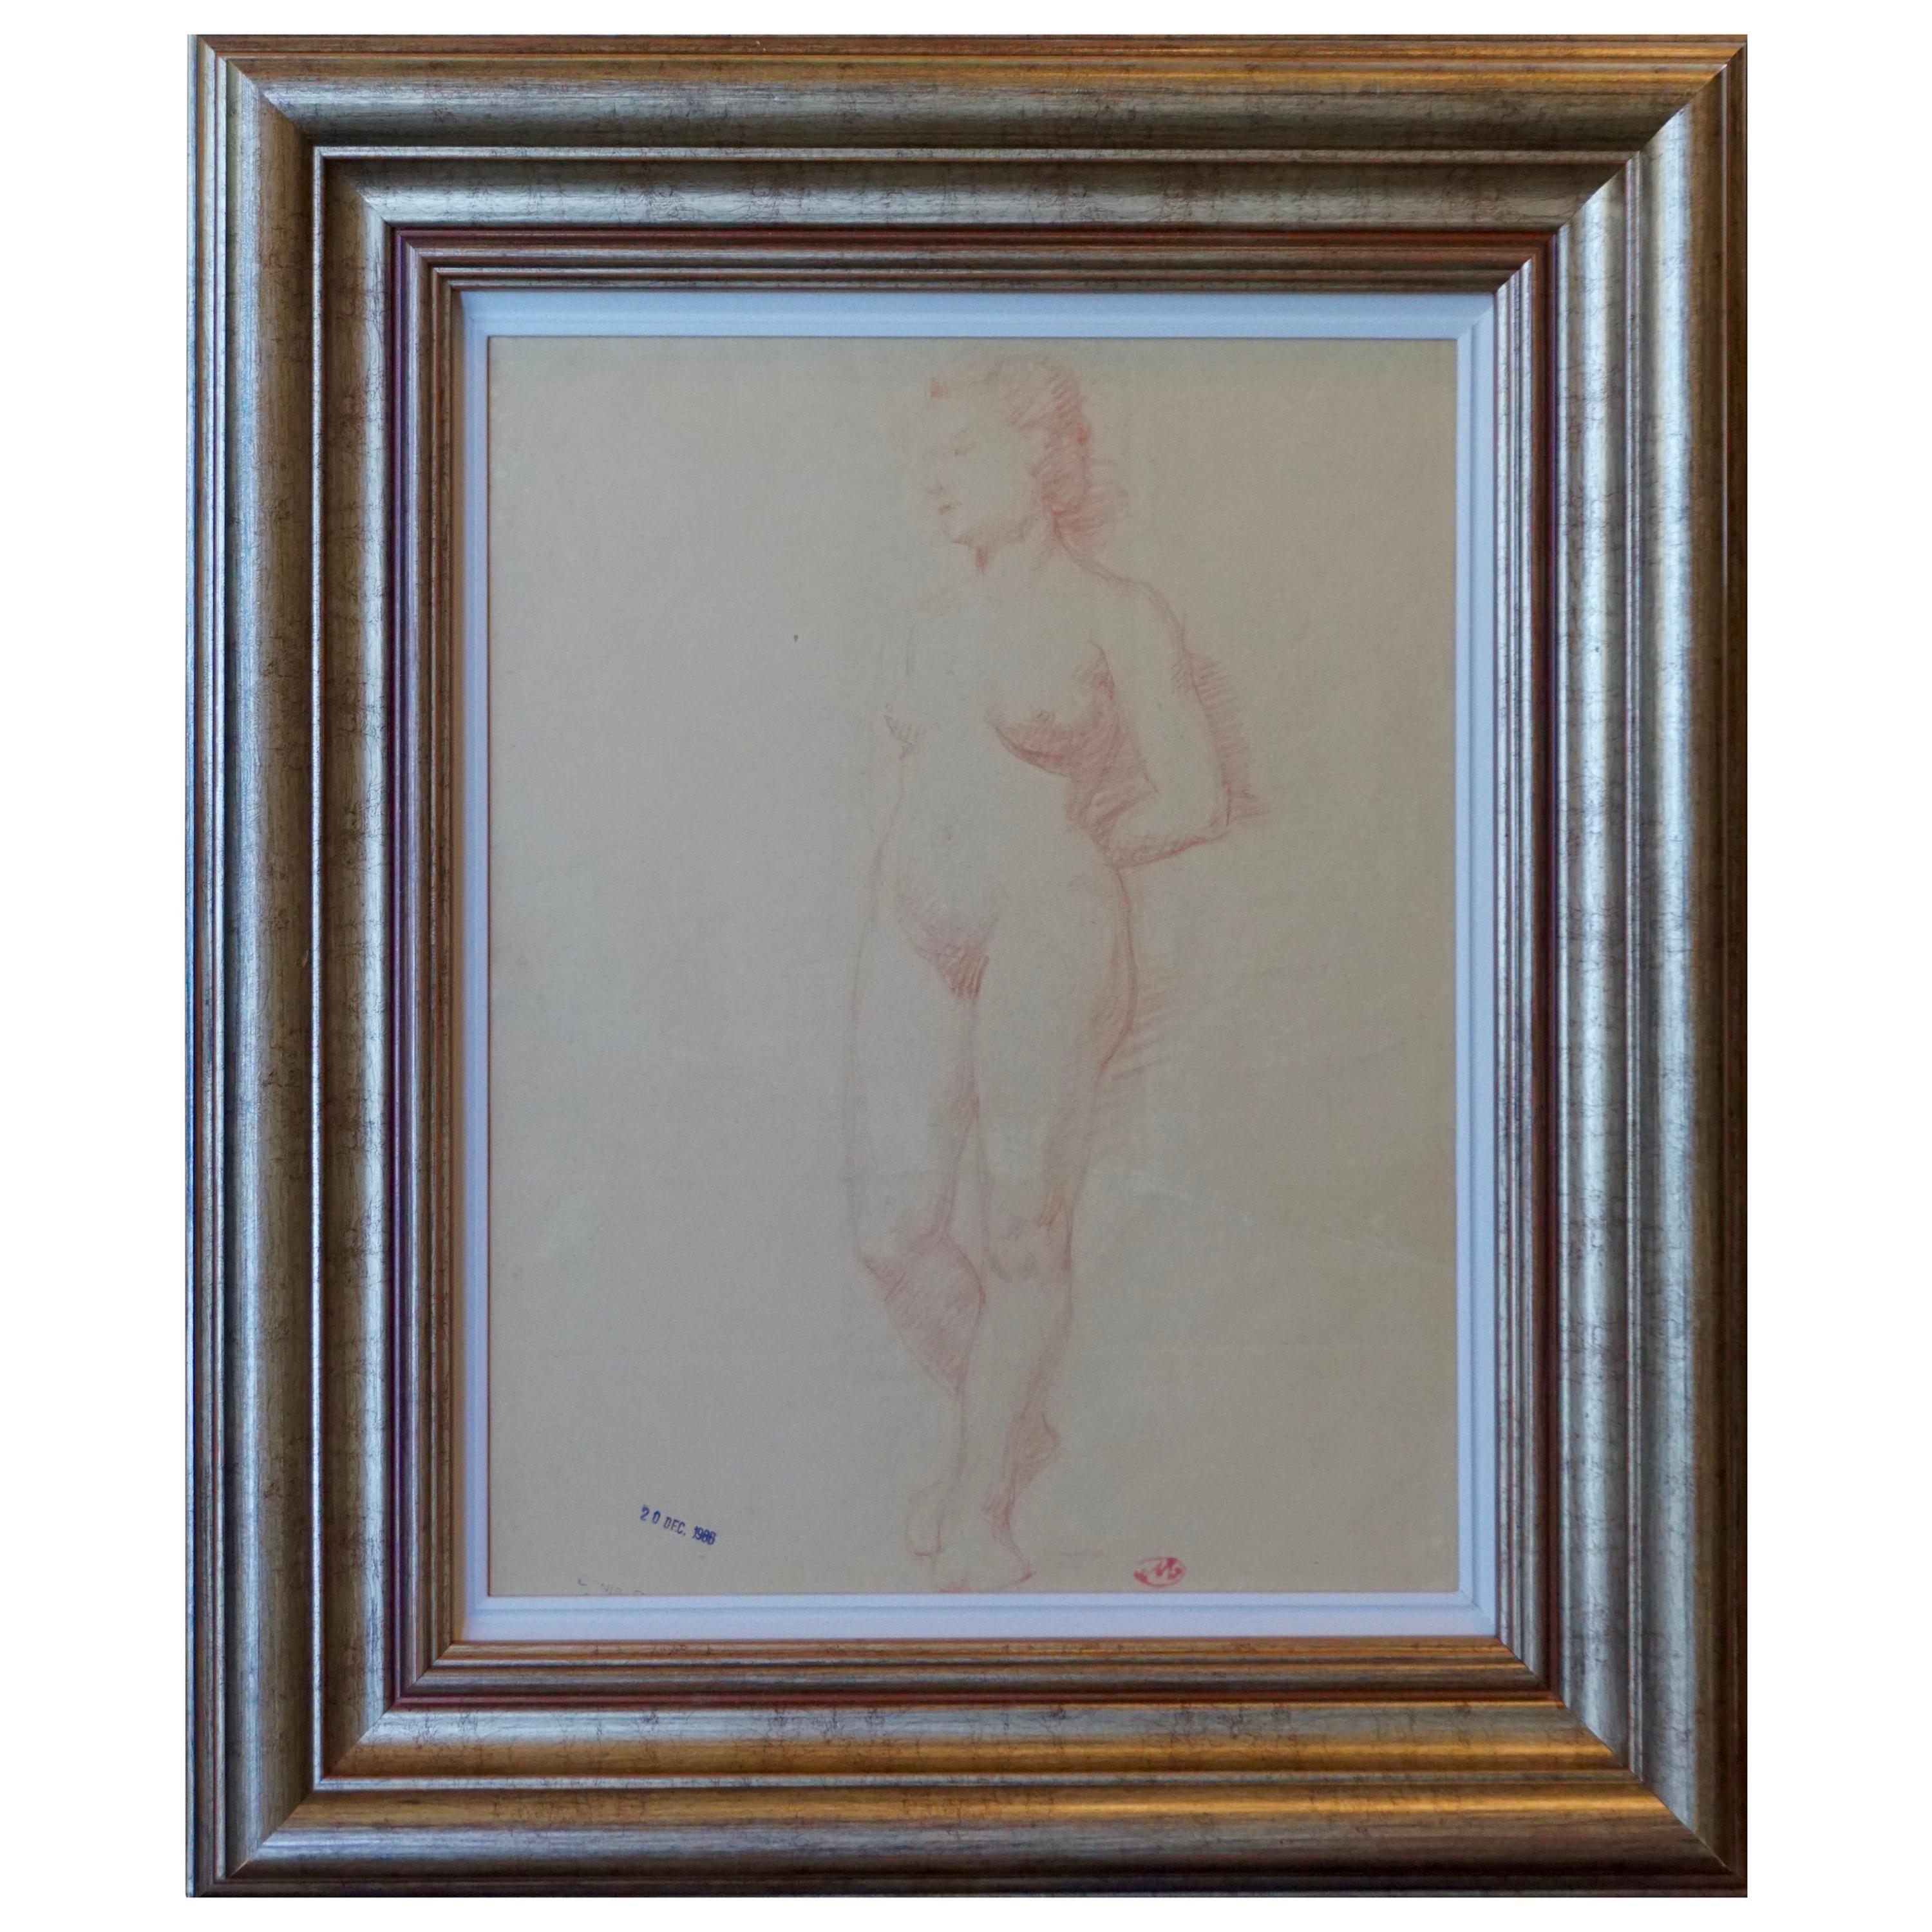 Aristide Maillol (Fr, 1861-1944) 

A very large original sanguine drawing by Aristide Maillol with a past Drouot Paris auction stamp on LL and Aristide Maillol’s stamped monogram “M” LR. The female figure posing nude standing frontal with arms